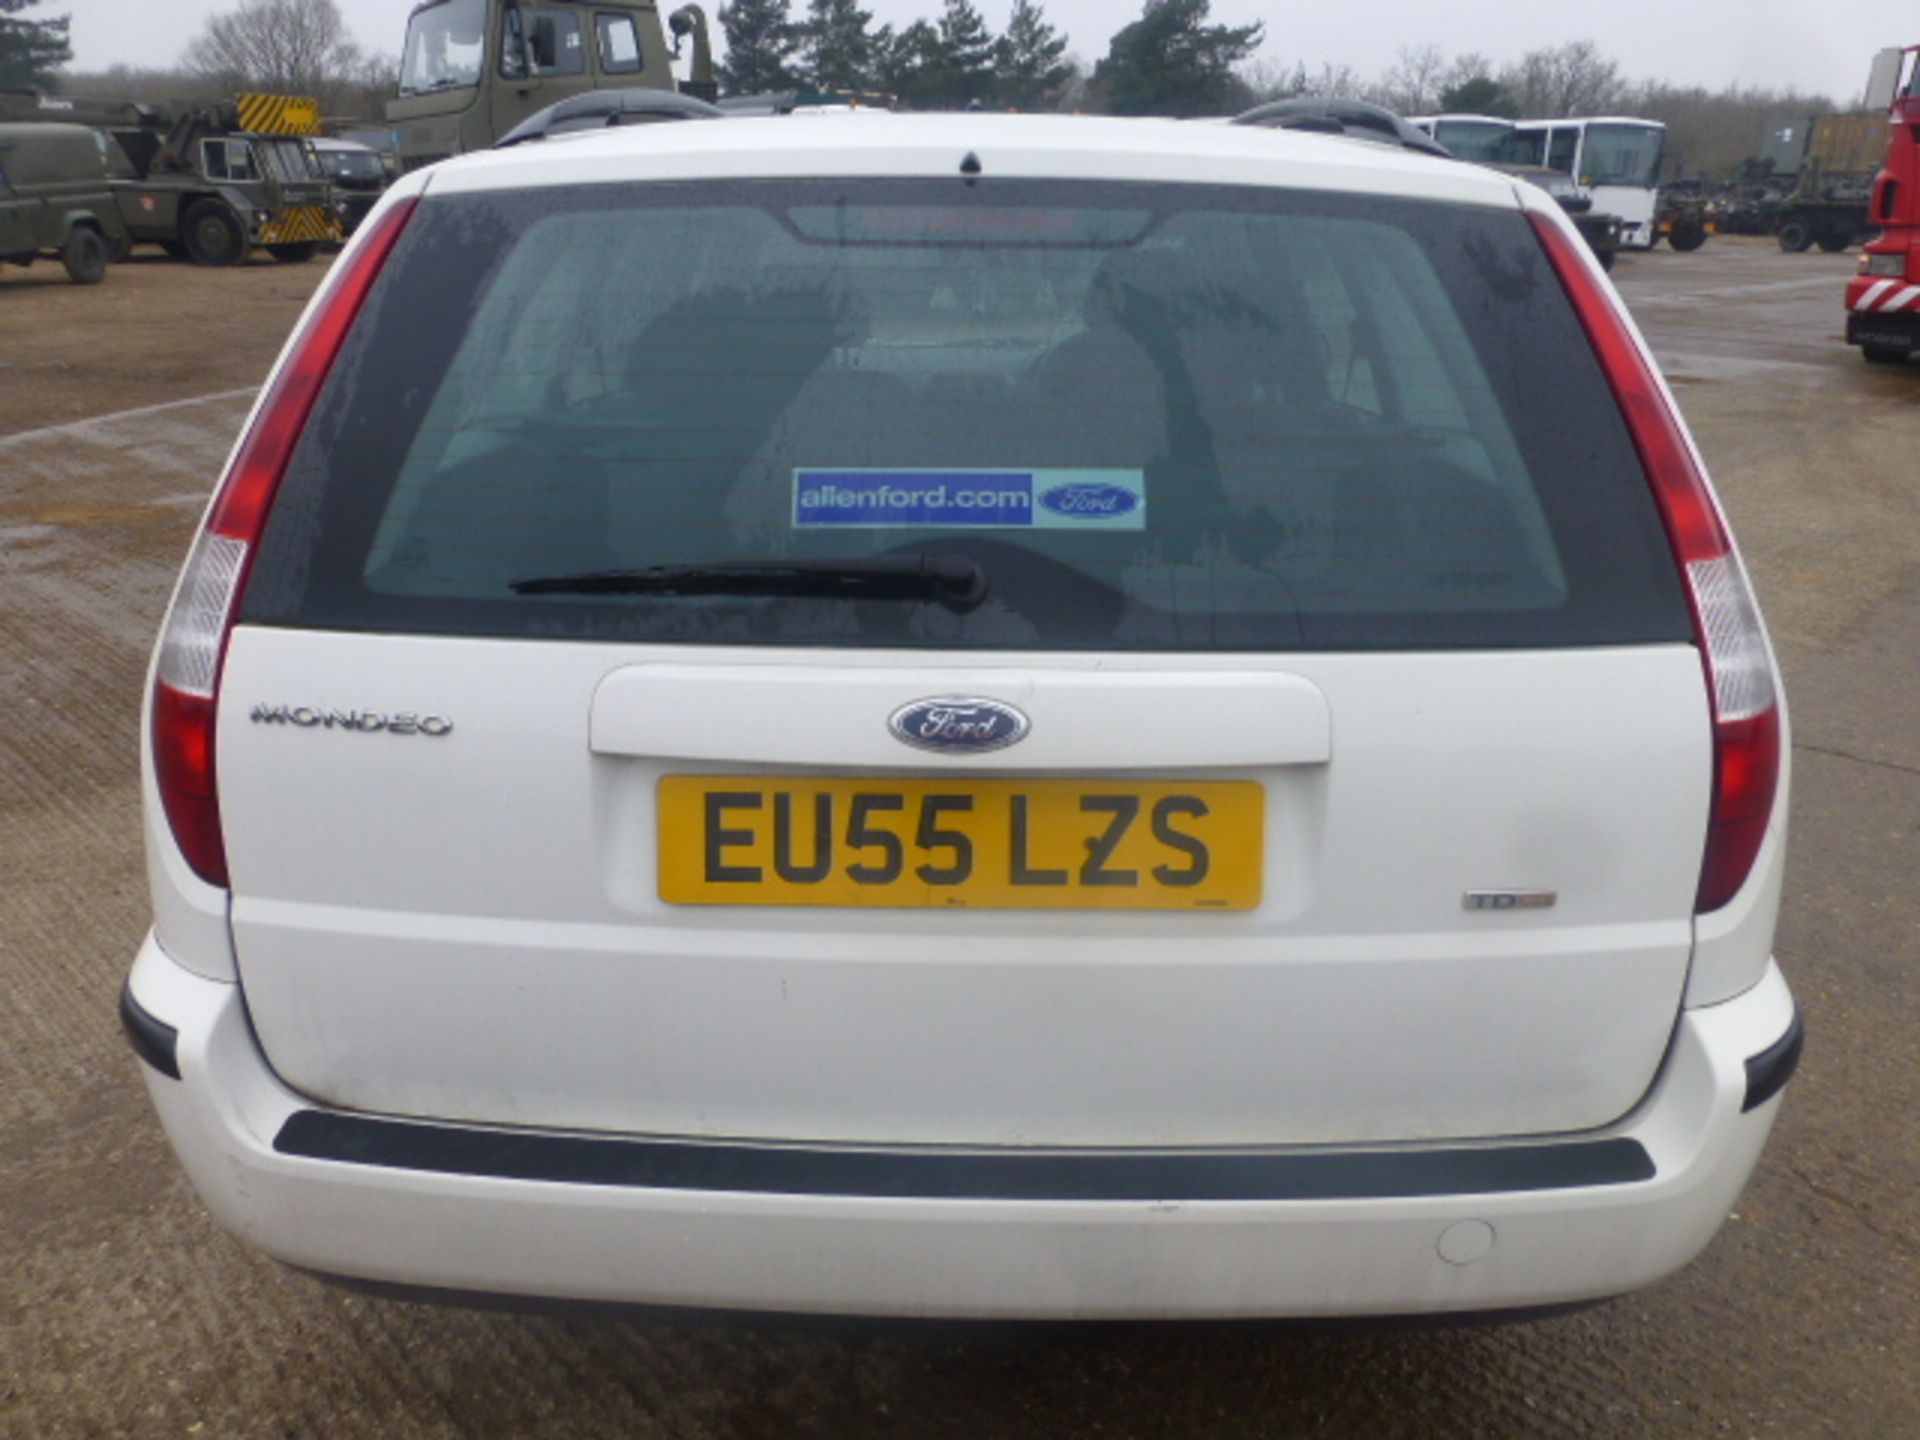 Ford Mondeo 2.0TDCi Estate - Image 7 of 16